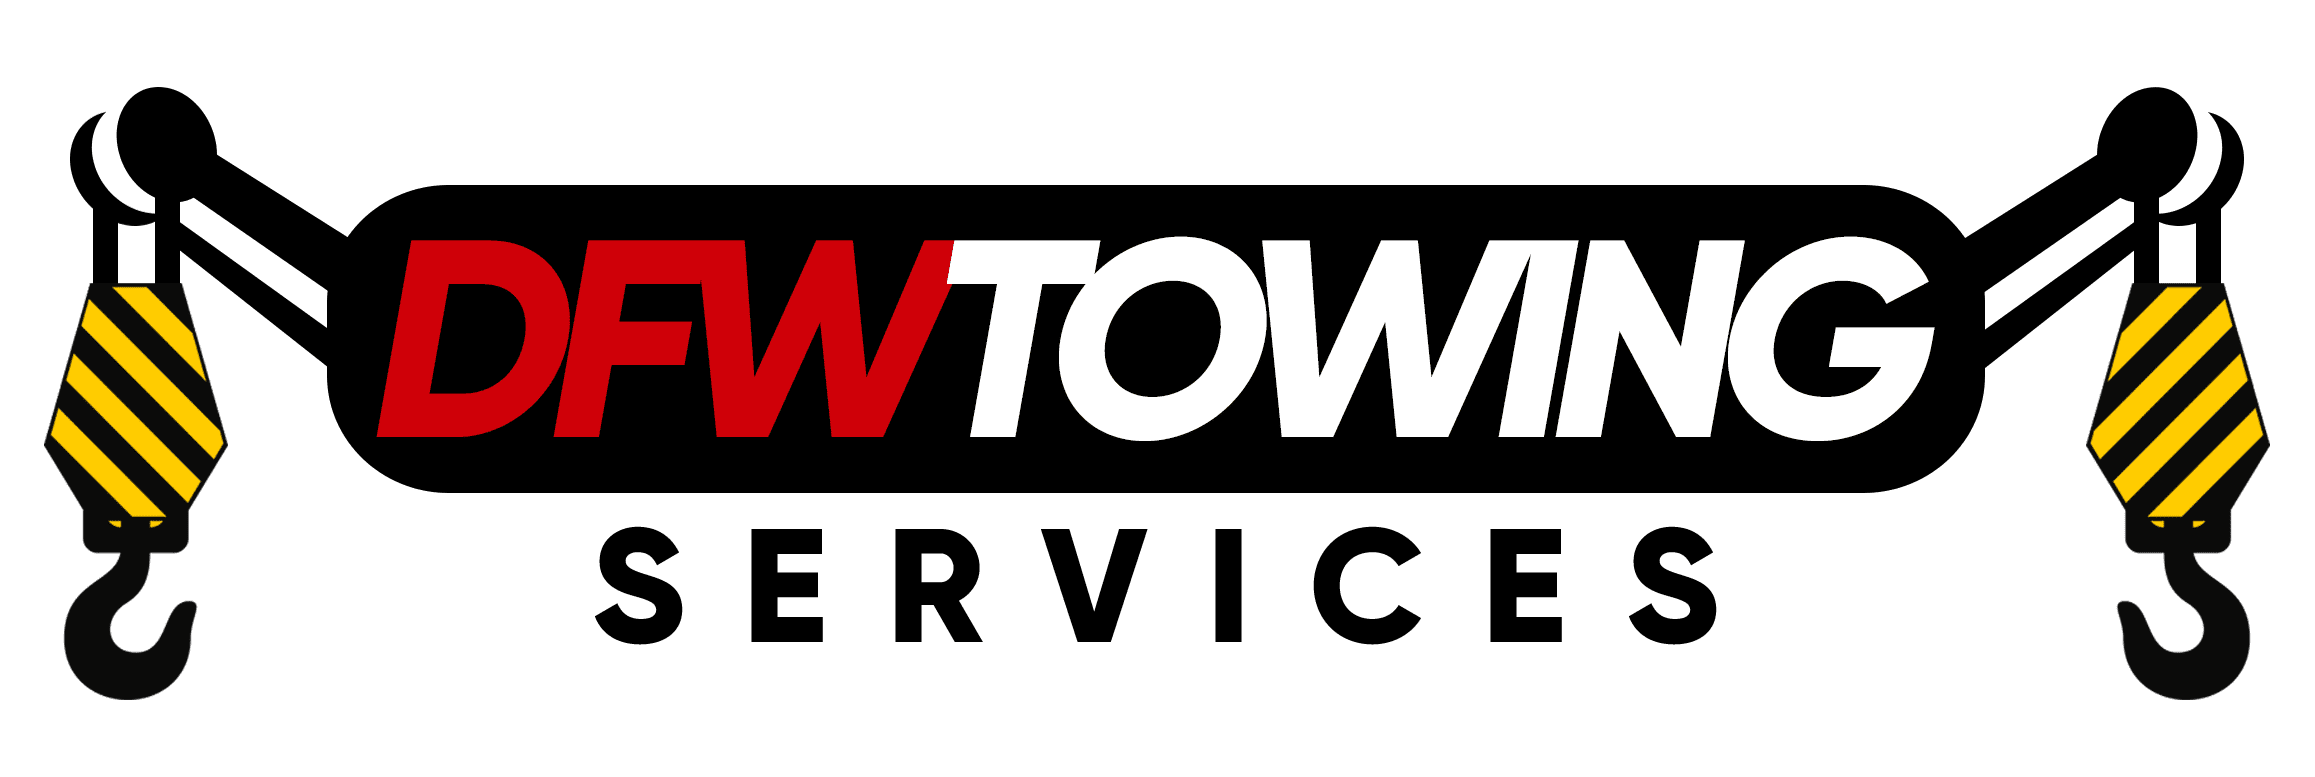 Contact Us | 24/7 Best Towing Service - Dfw Towing Services